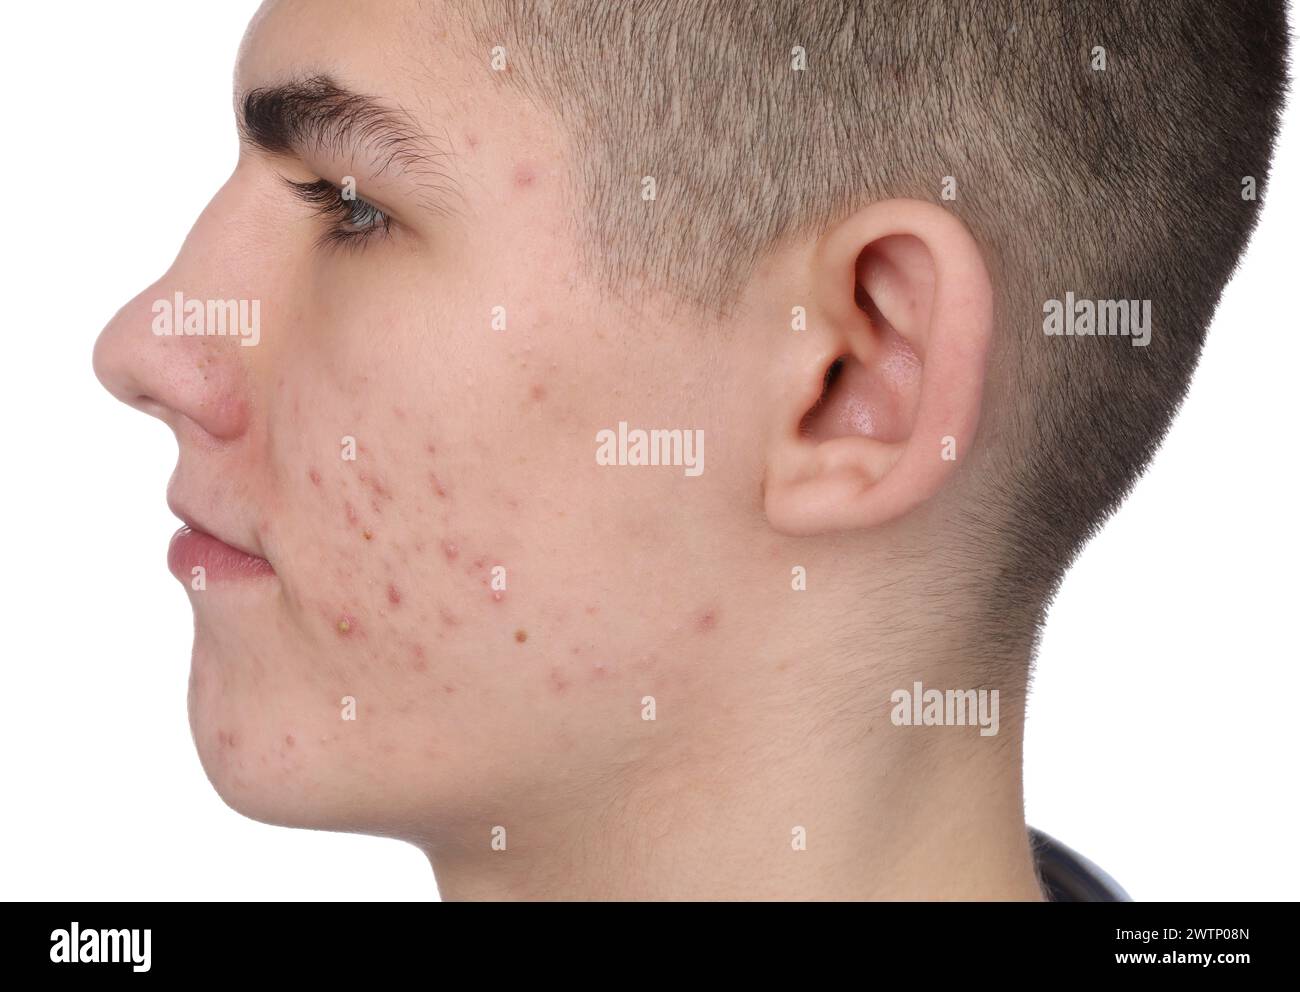 Young man with acne problem isolated on white Stock Photo